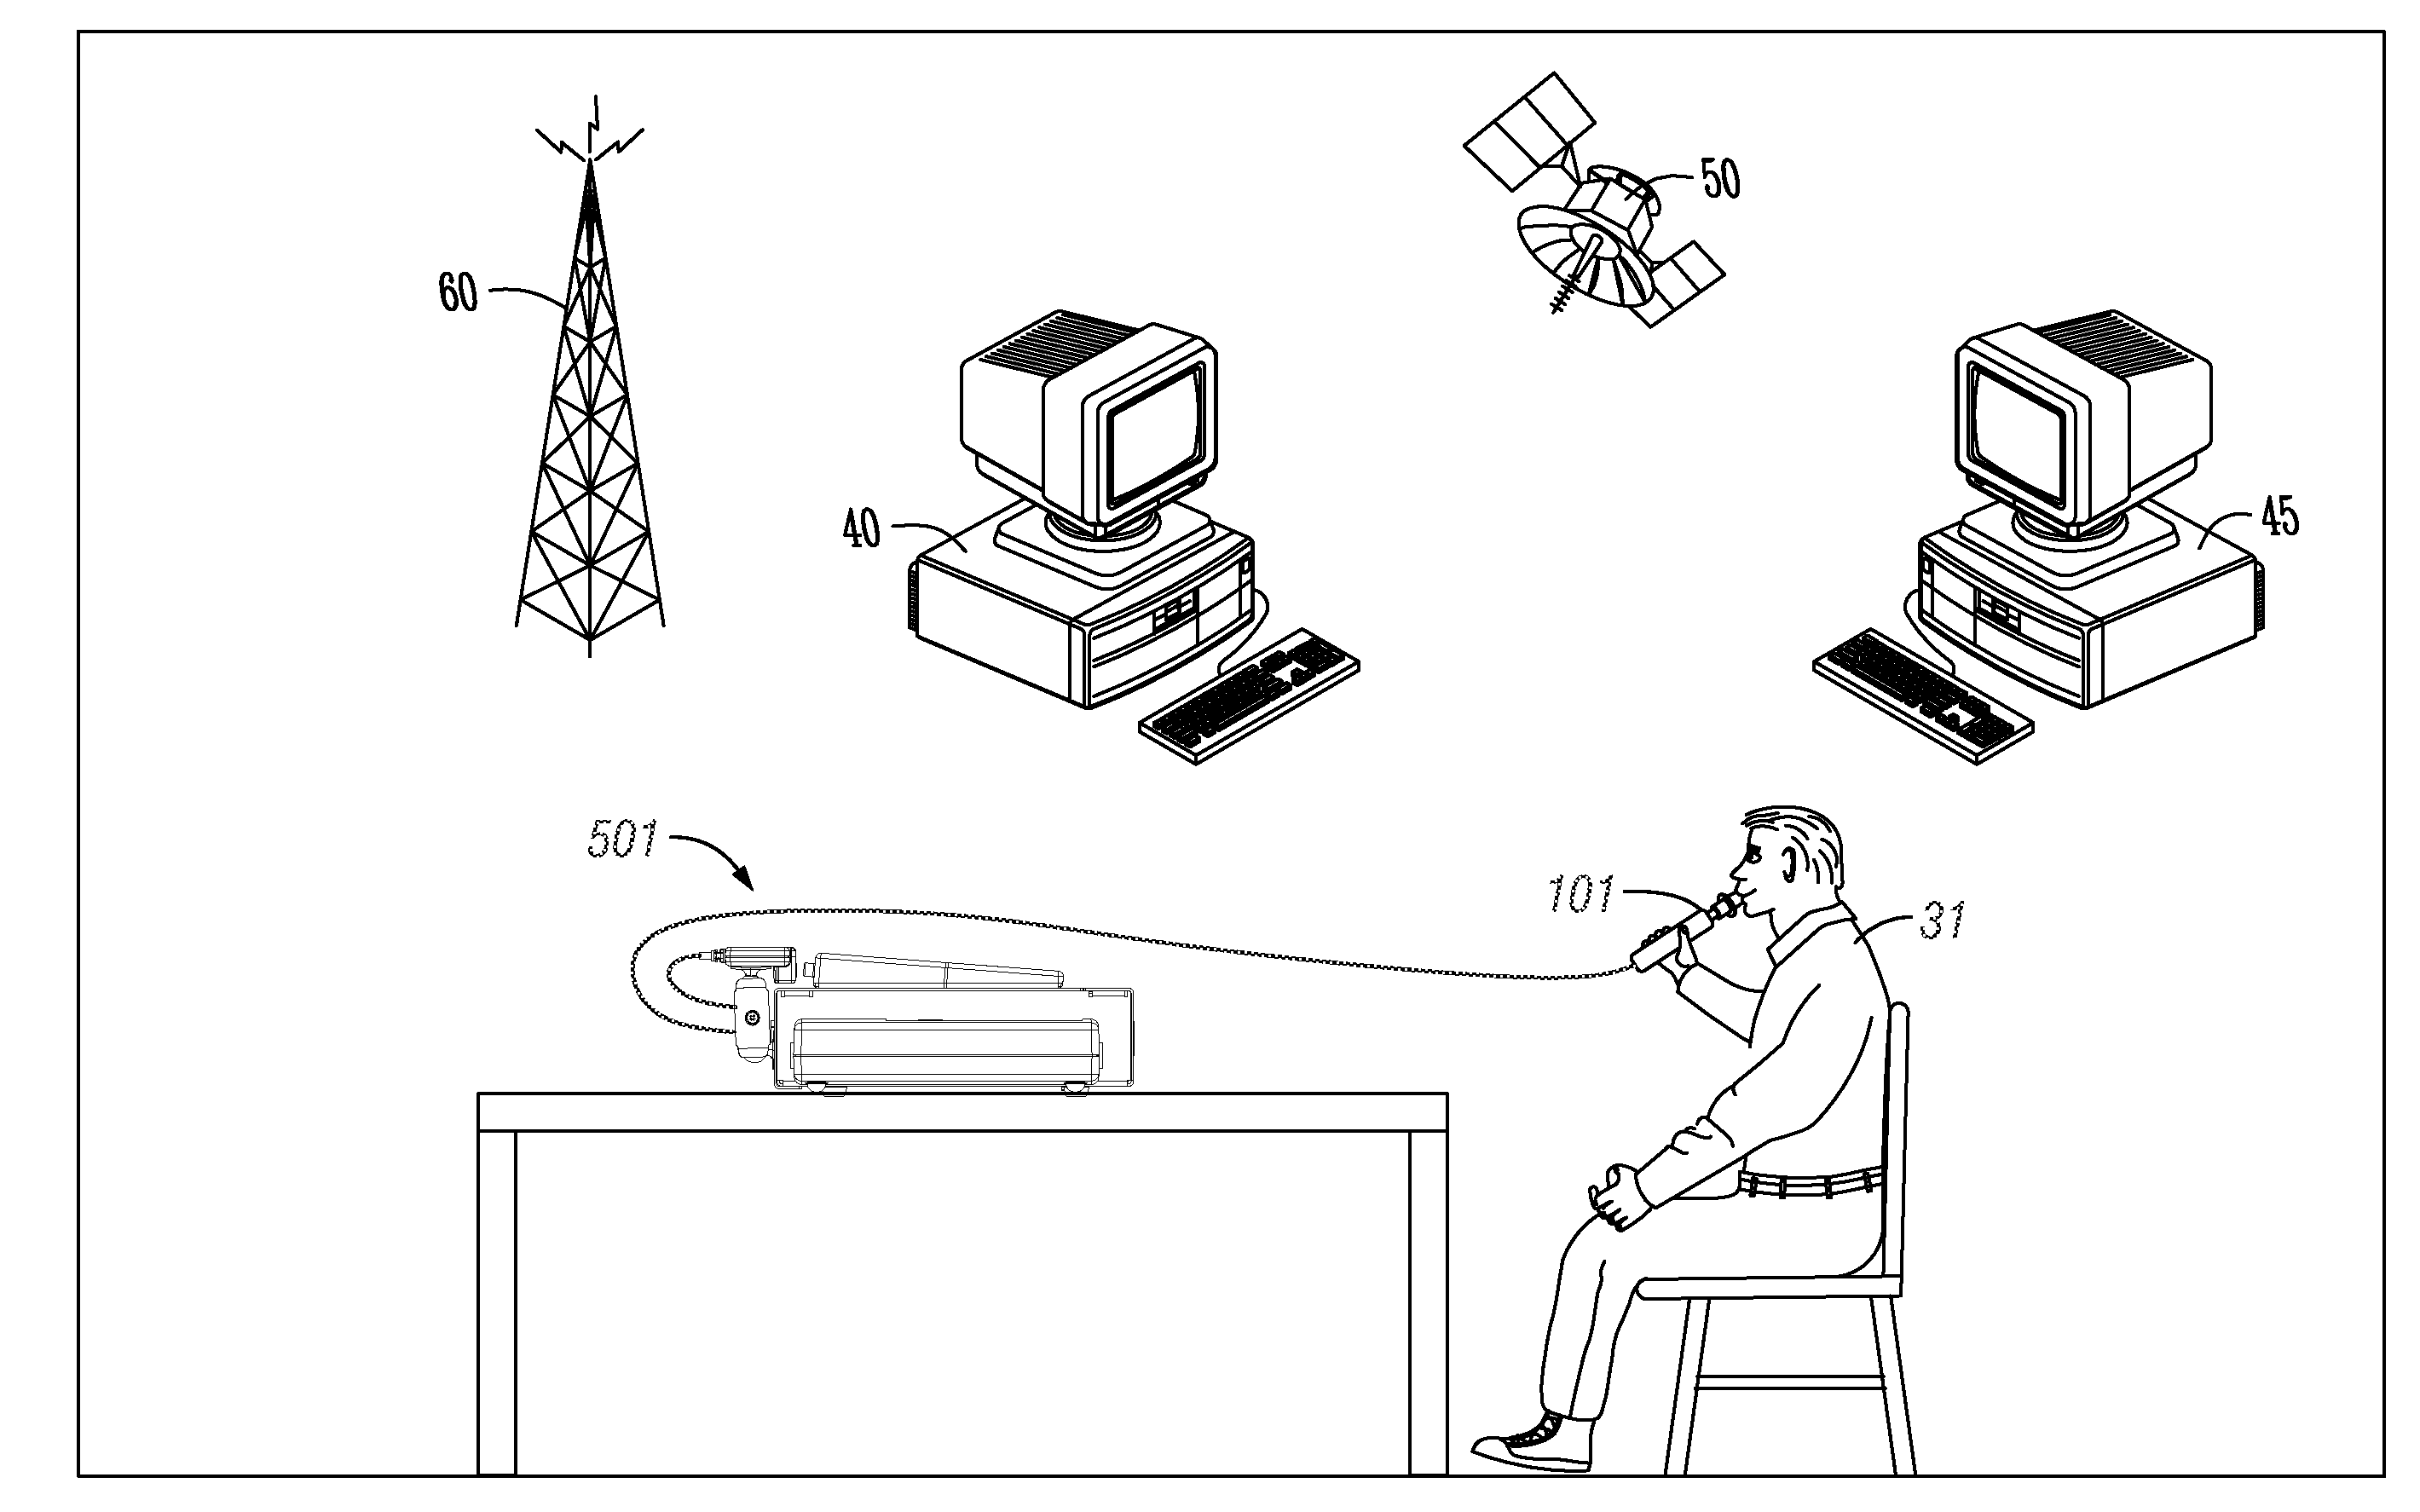 Apparatus, system, and method for implementing and monitoring breath alcohol testing programs, usually from a fixed point location, such as a home